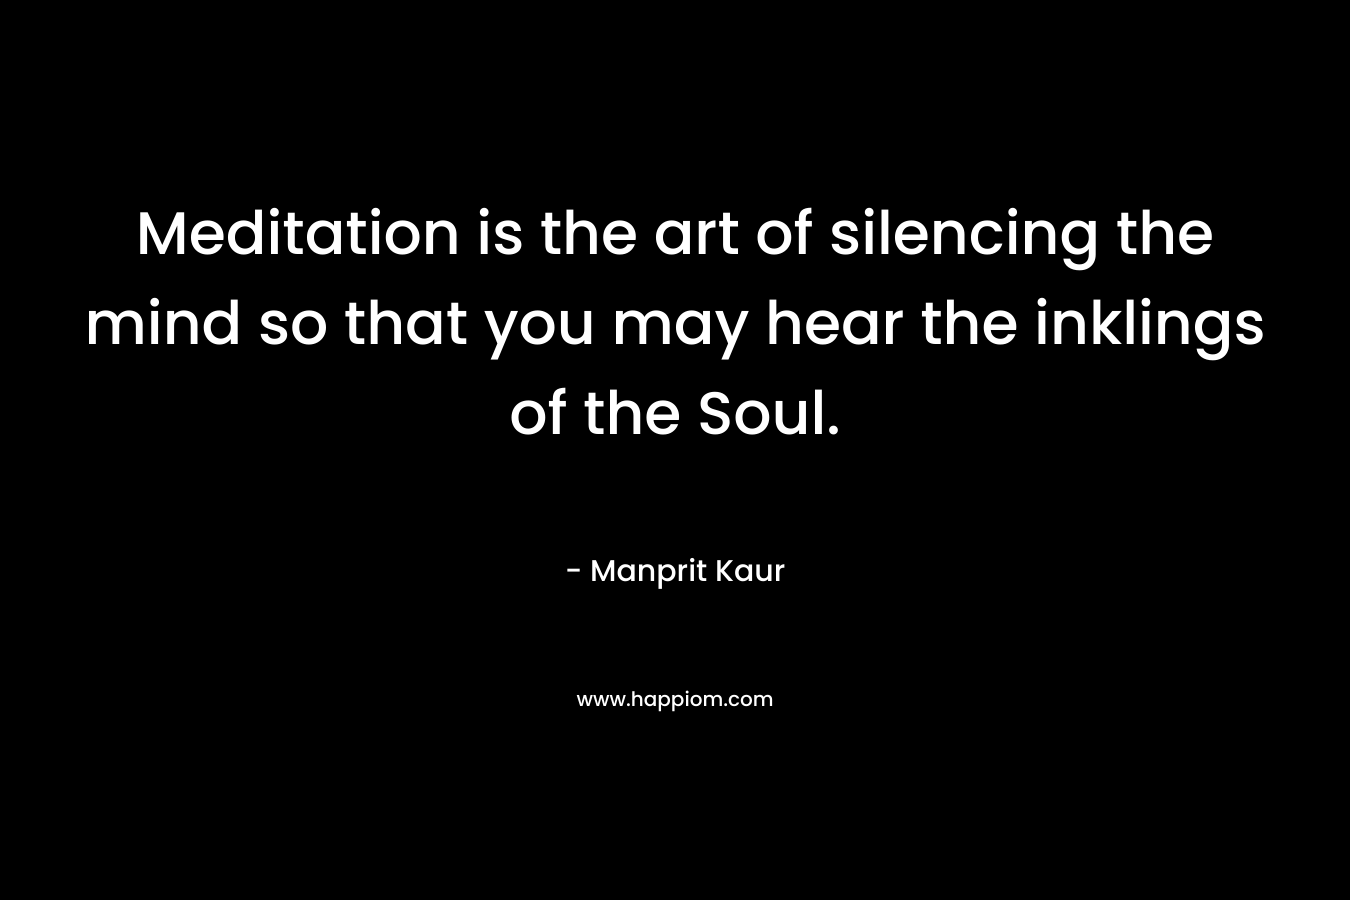 Meditation is the art of silencing the mind so that you may hear the inklings of the Soul. – Manprit Kaur